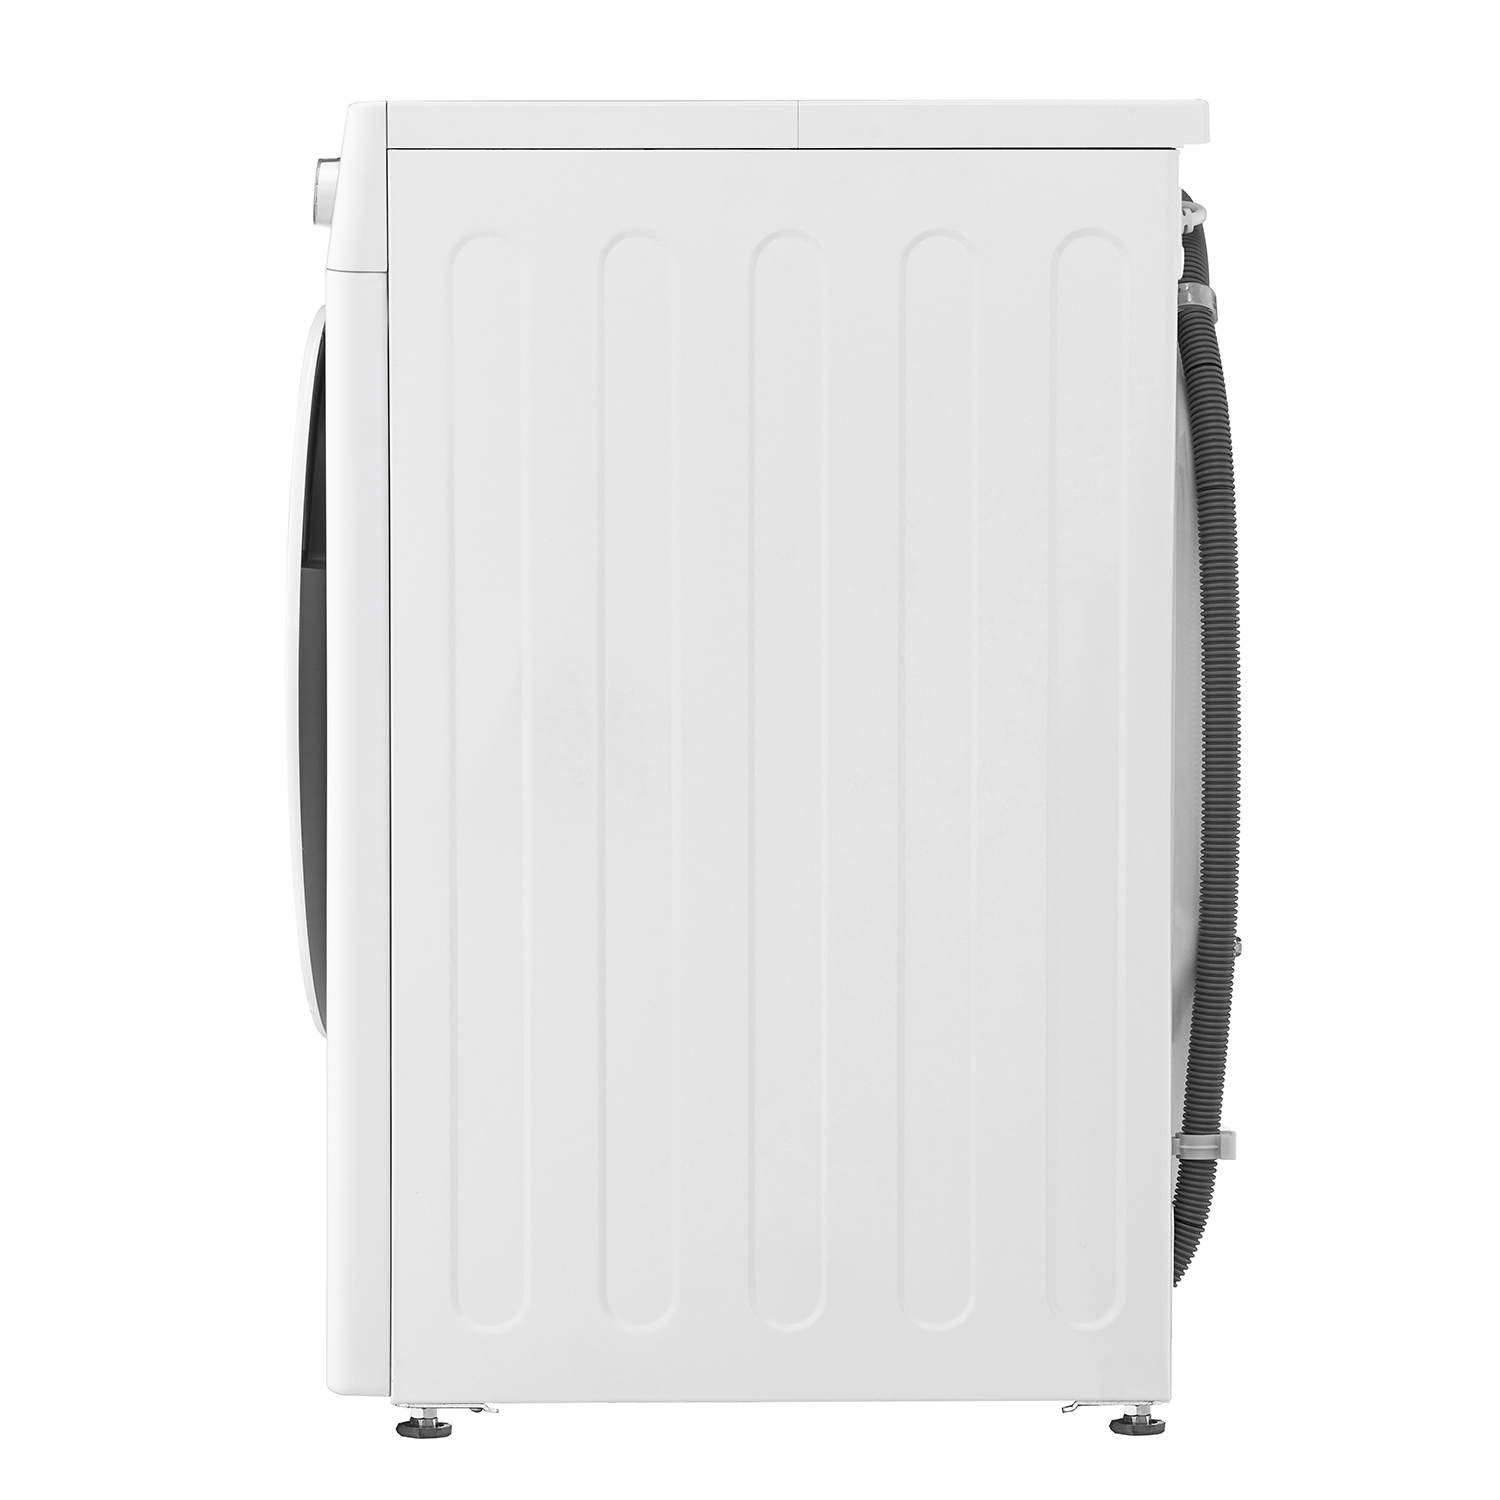 LG F4V308WNW 8kg 1400 Spin Washing Machine with 6 Motion Direct Drive - White - 2